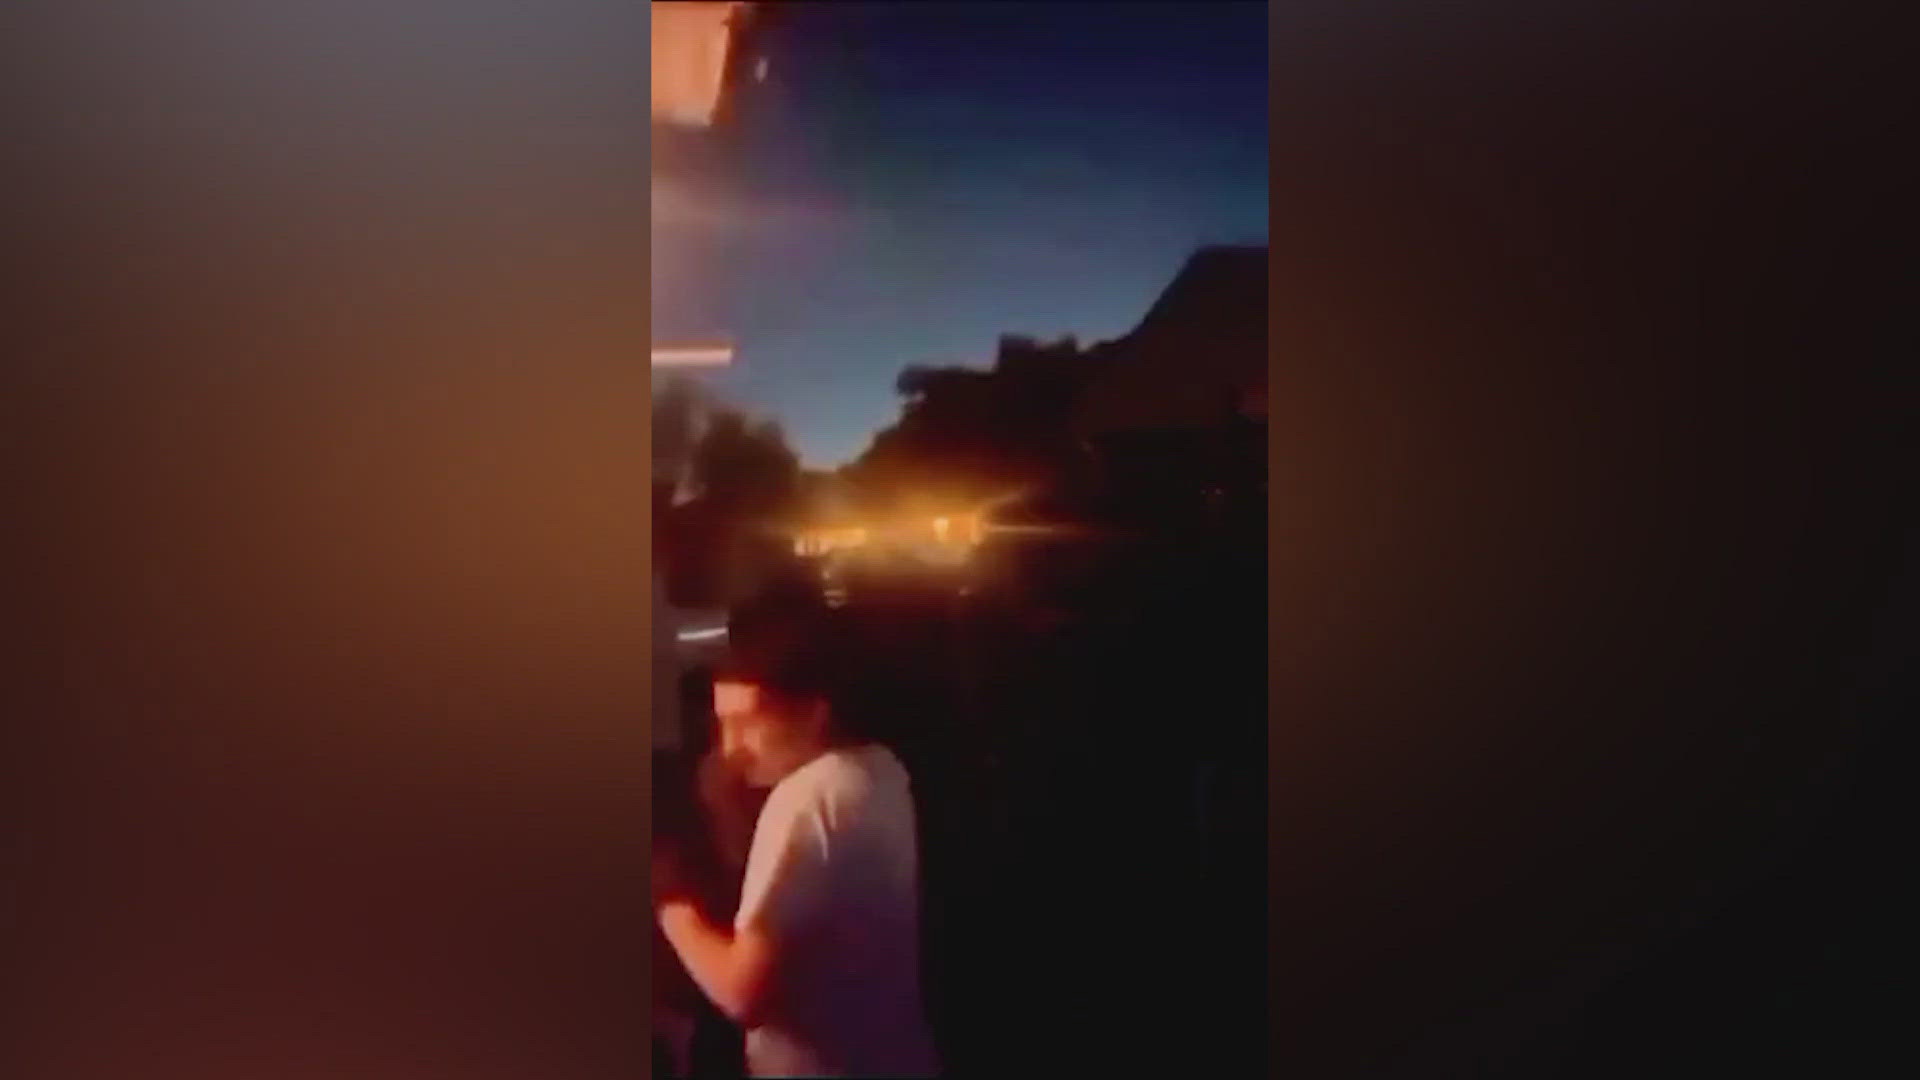 New video of gunfire that struck a teen in the head after house party